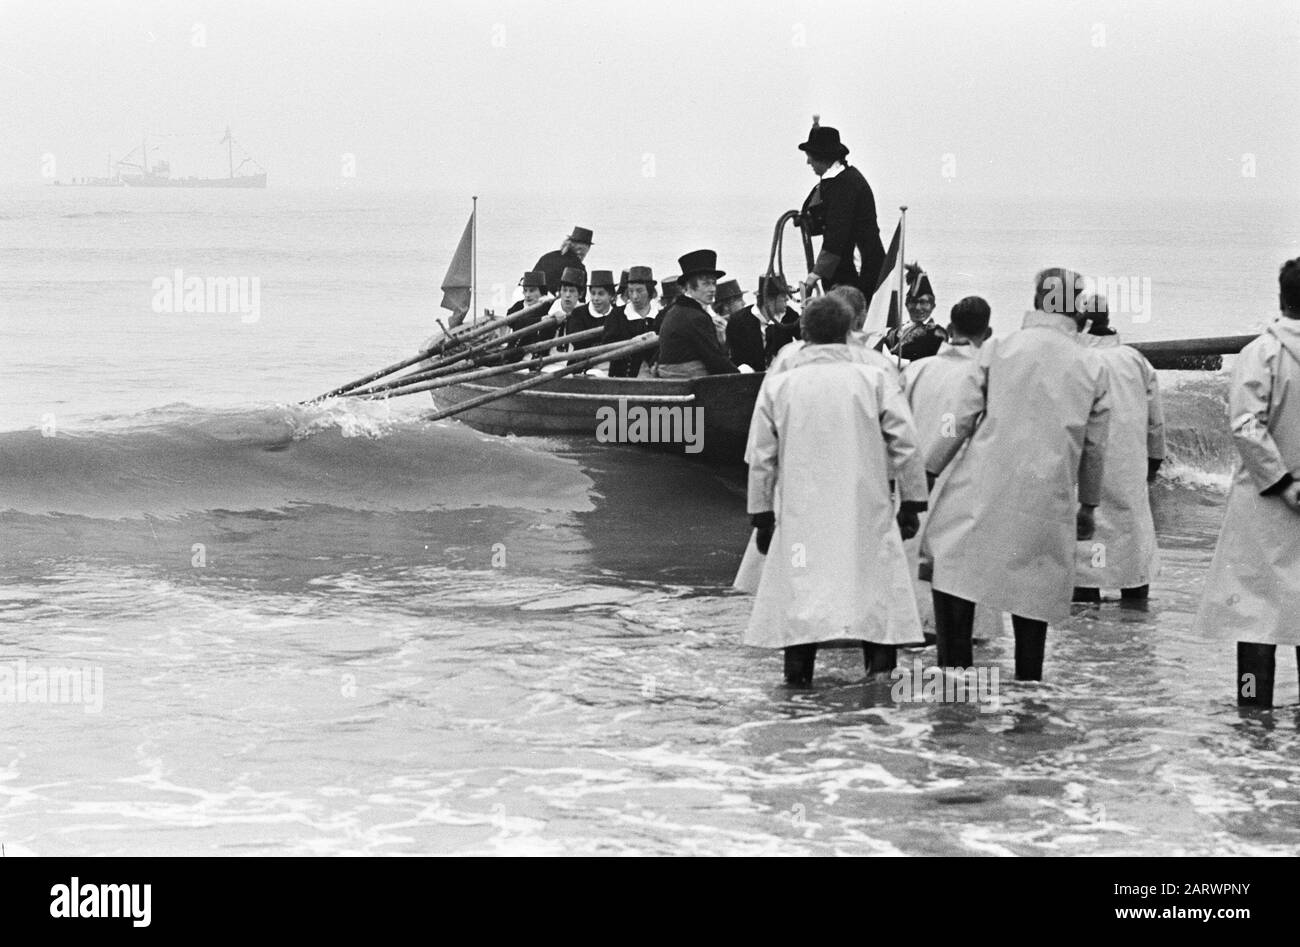 Te Scheveningen commemorated the landing and entry of Prince Willem Frederik. Spectators in 18th century clothing 1813-1863 Date: 30 November 1963 Location: Scheveningen, Zuid-Holland Keywords: Spectators, commemorations, entries, landings Personal name: FREDERIK, WILLEM PRINS Stock Photo